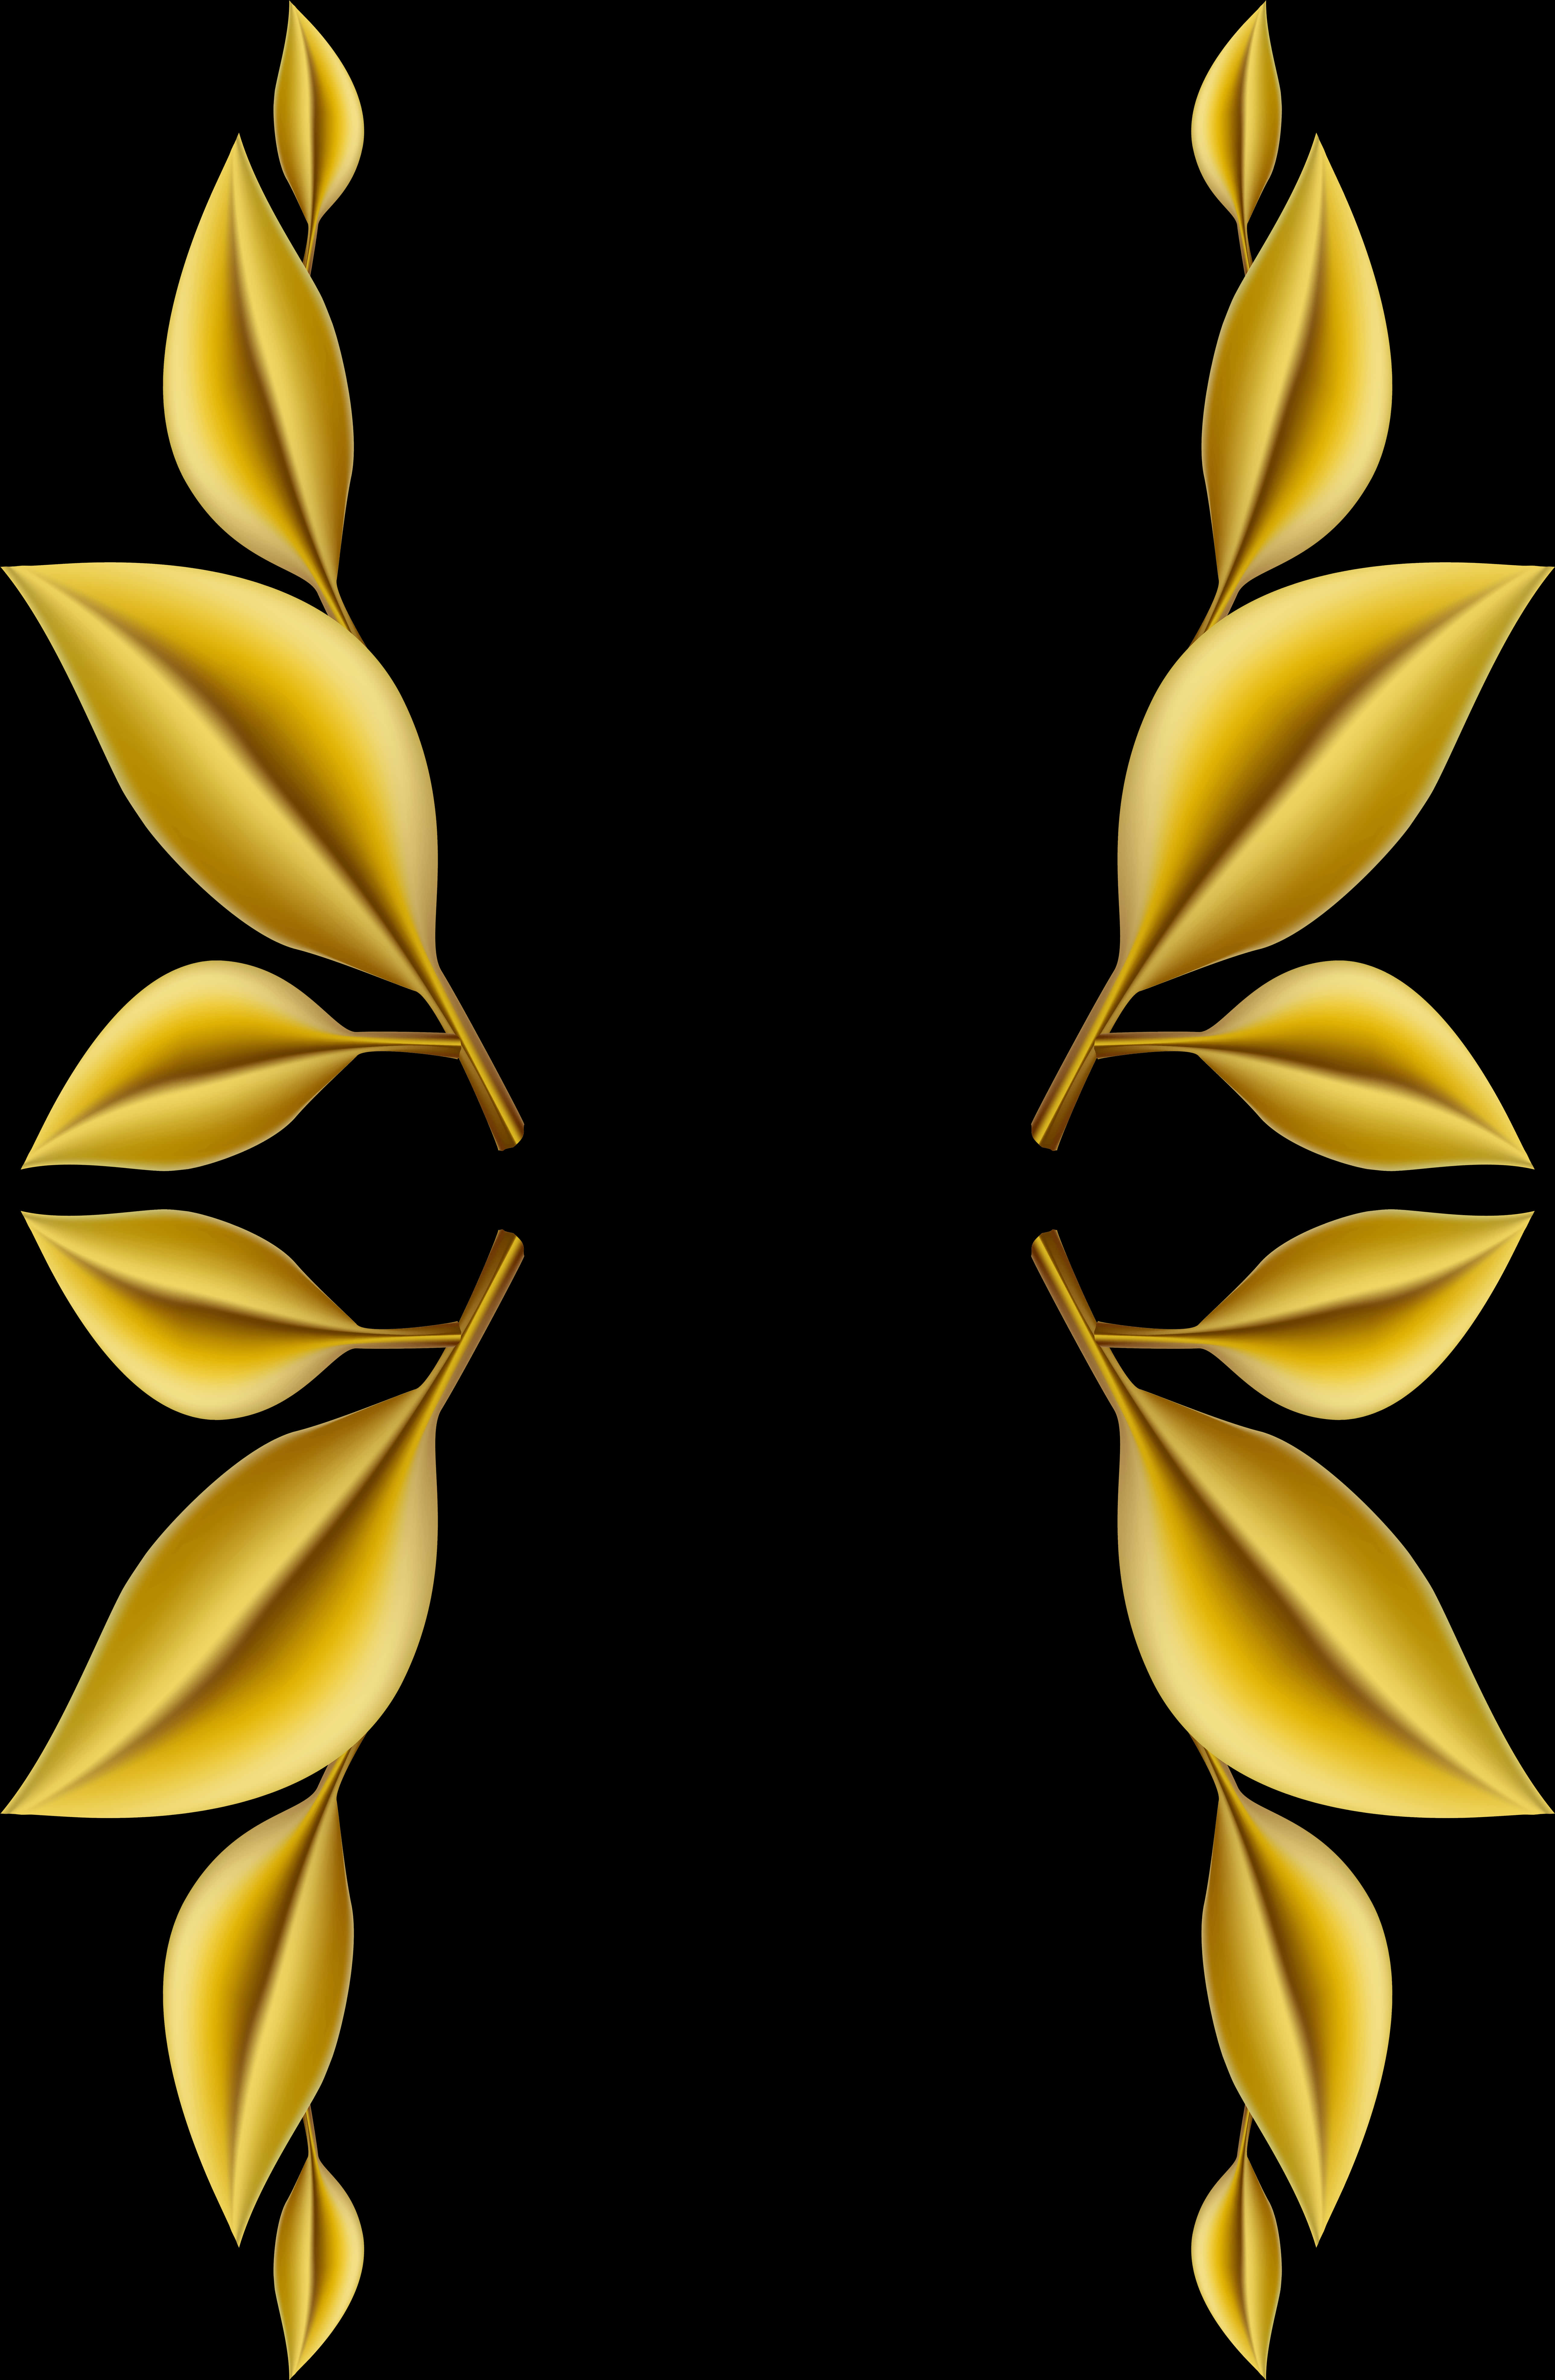 A Gold Leaves On A Black Background